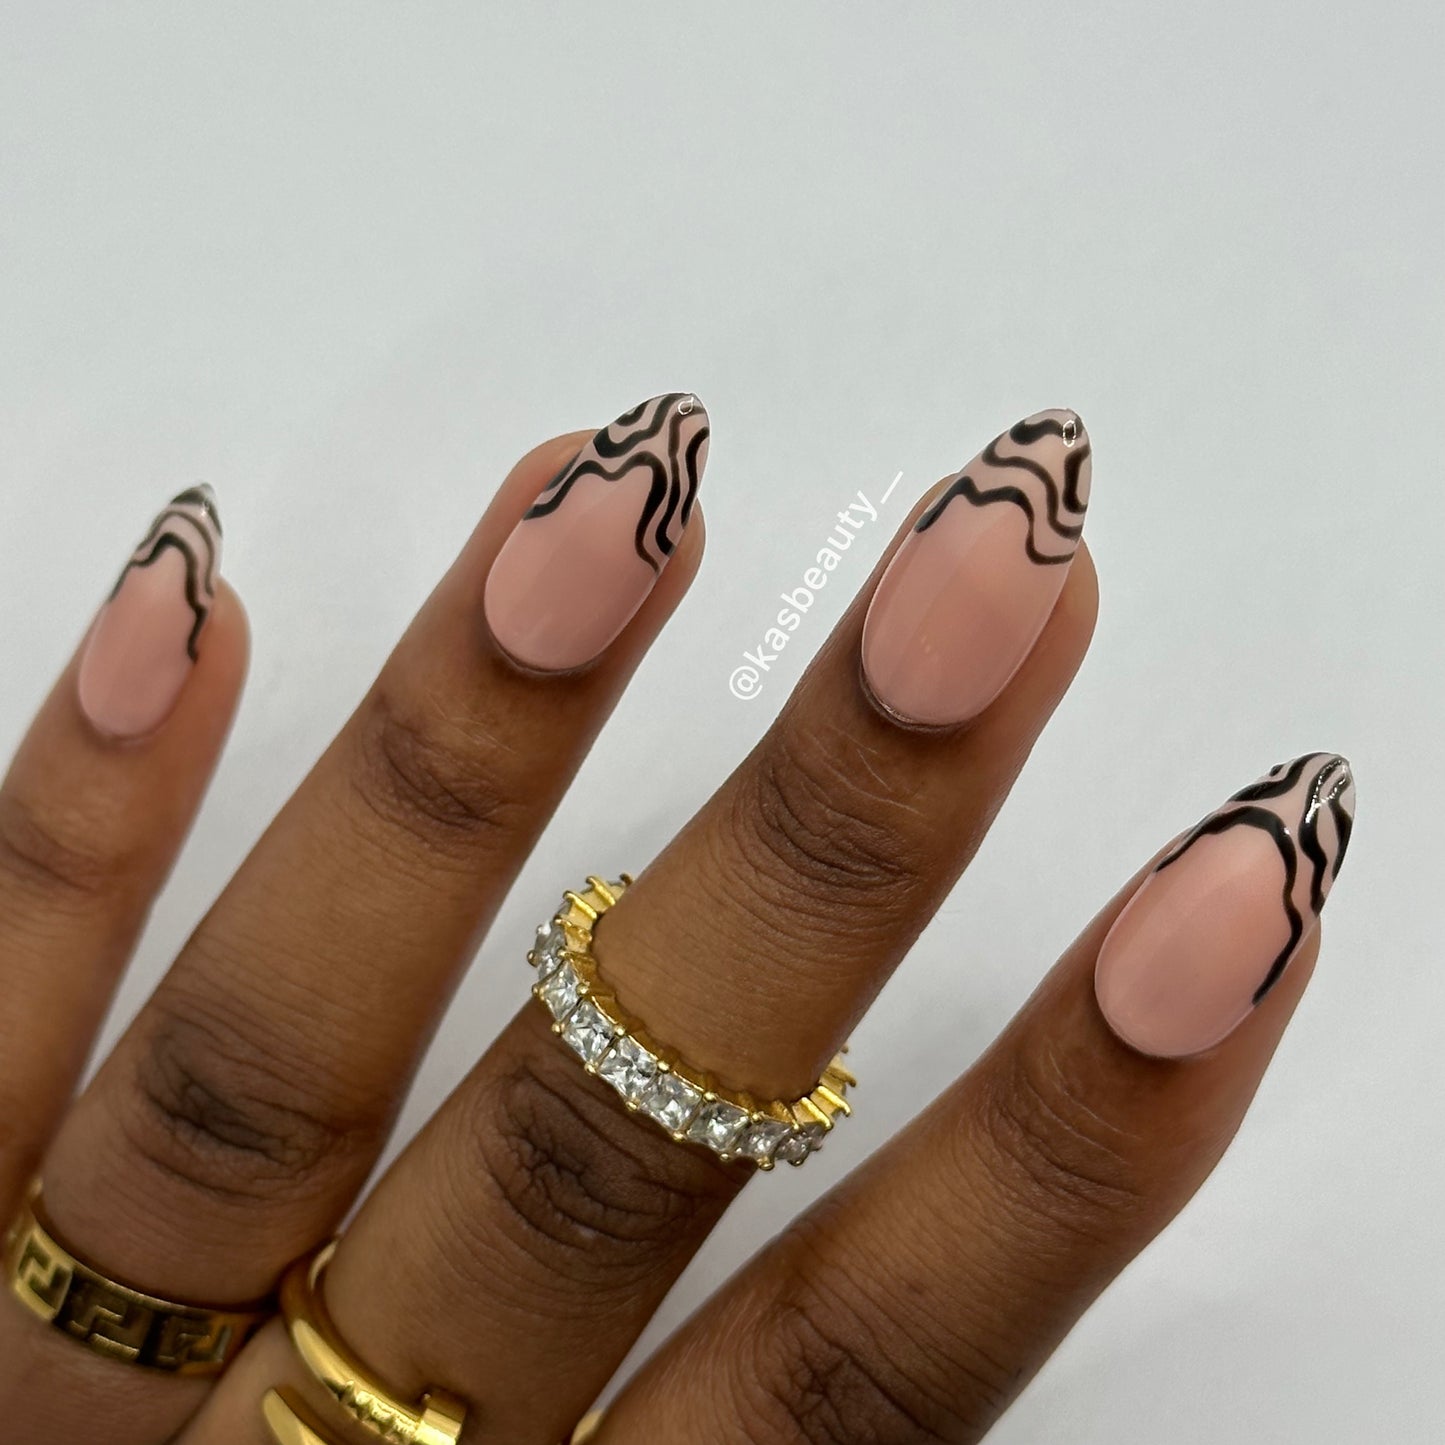 Feisty Press On Nails